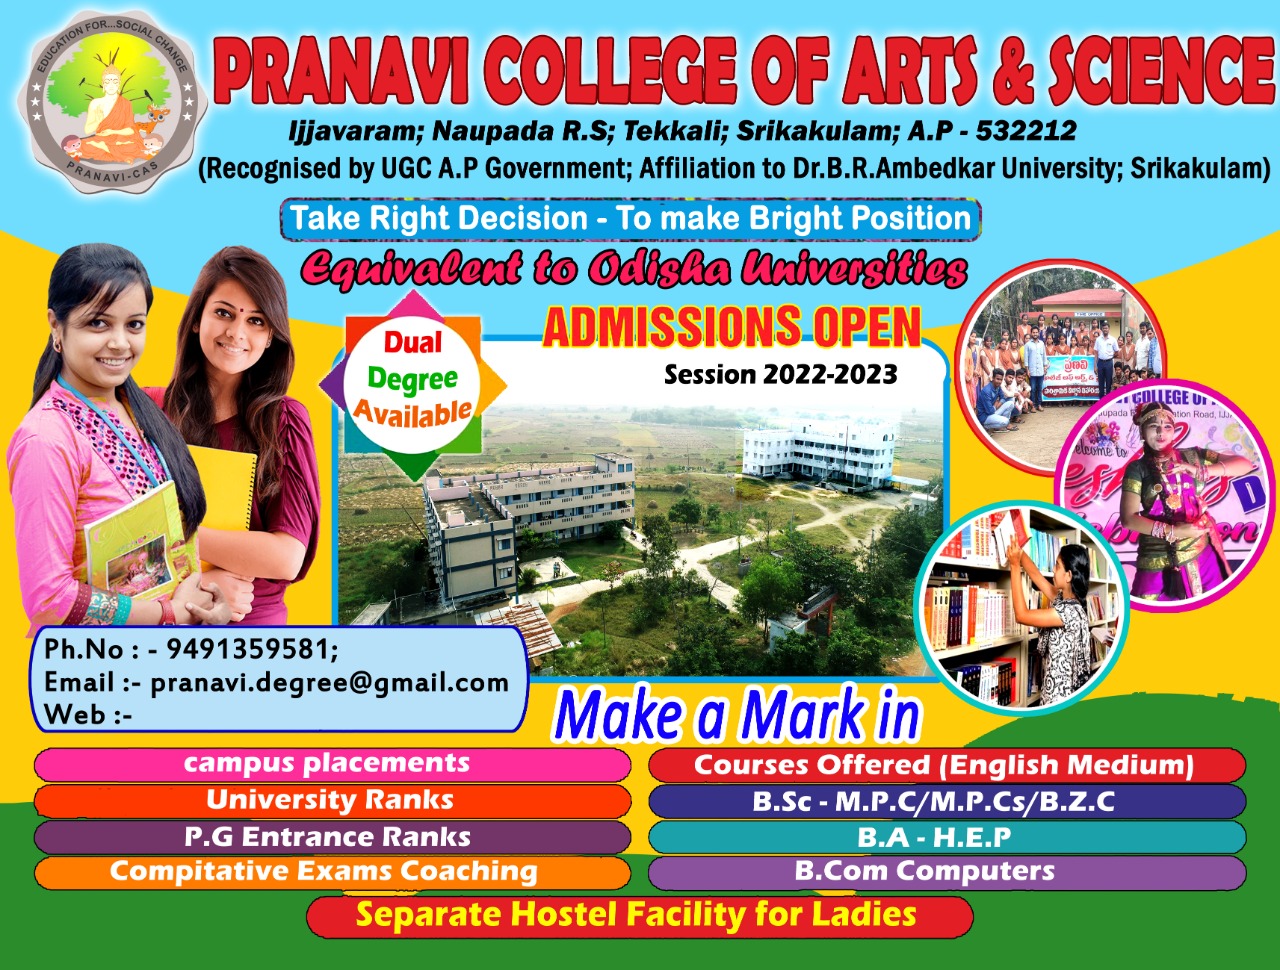 Welcome To Pranavi College of Arts and Science 